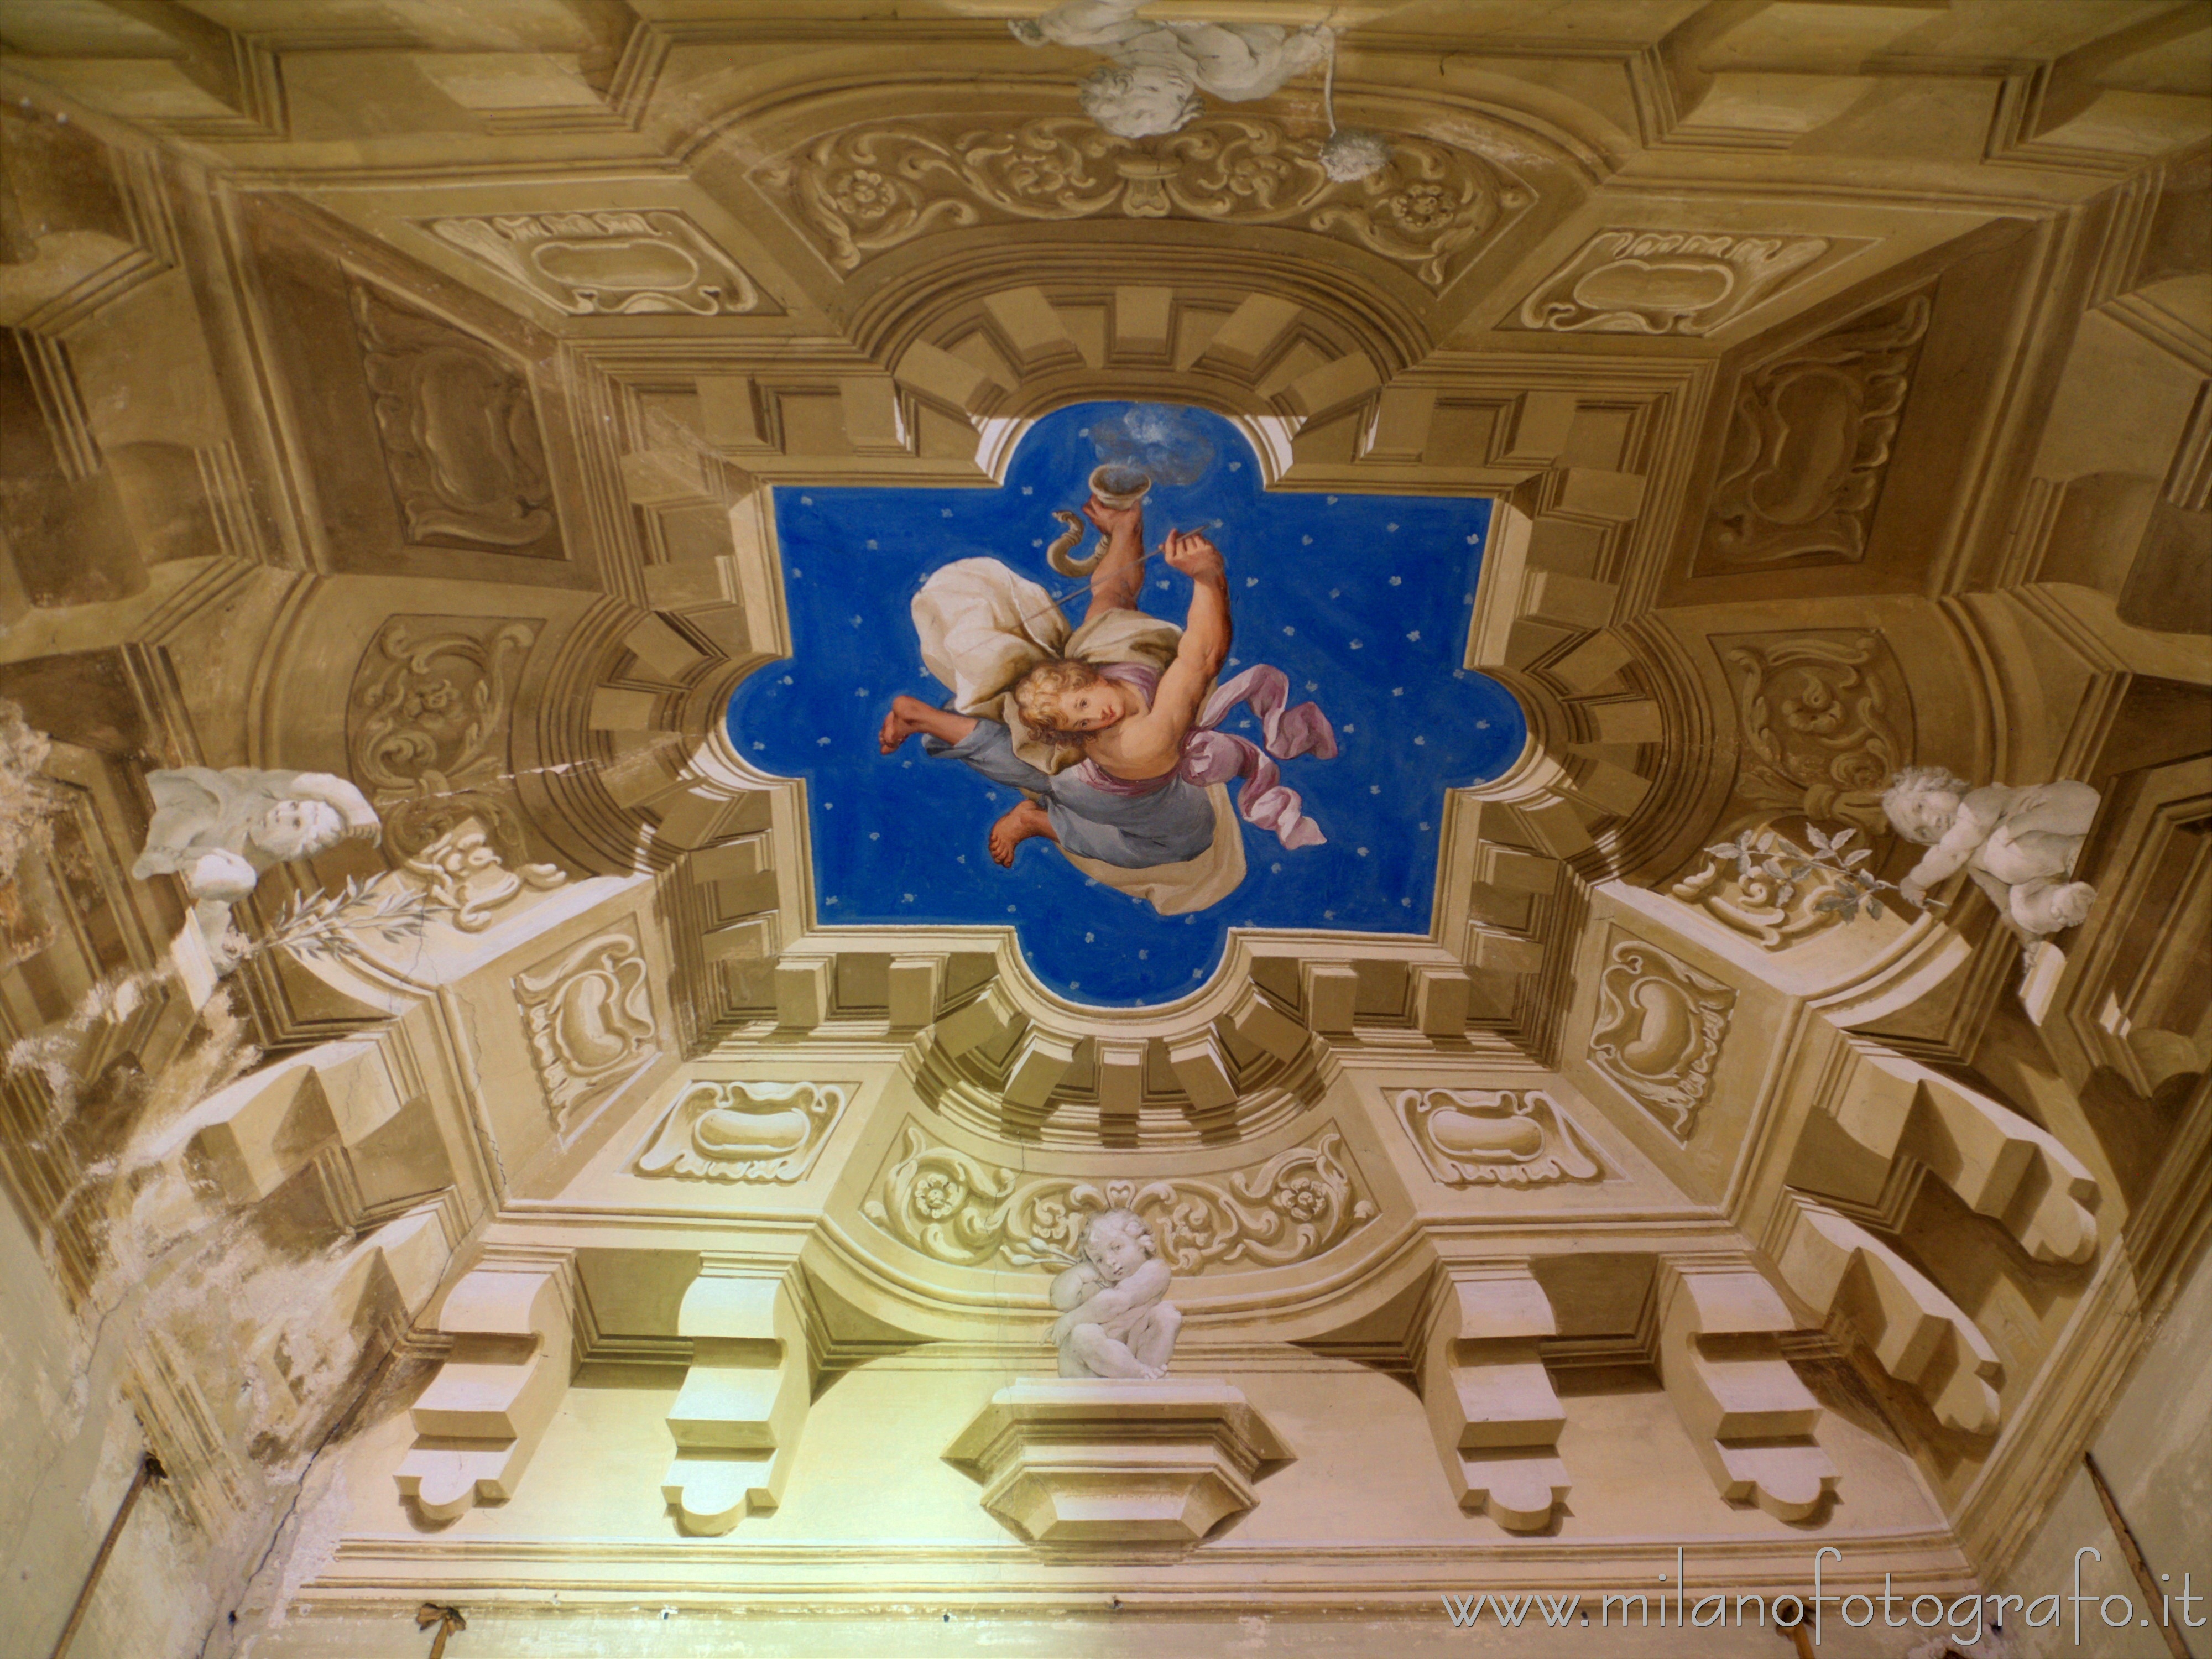 Bollate (Milan, Italy): Trompe-l'oeil sky on the ceiling of one of the rooms of Villa Arconati - Bollate (Milan, Italy)